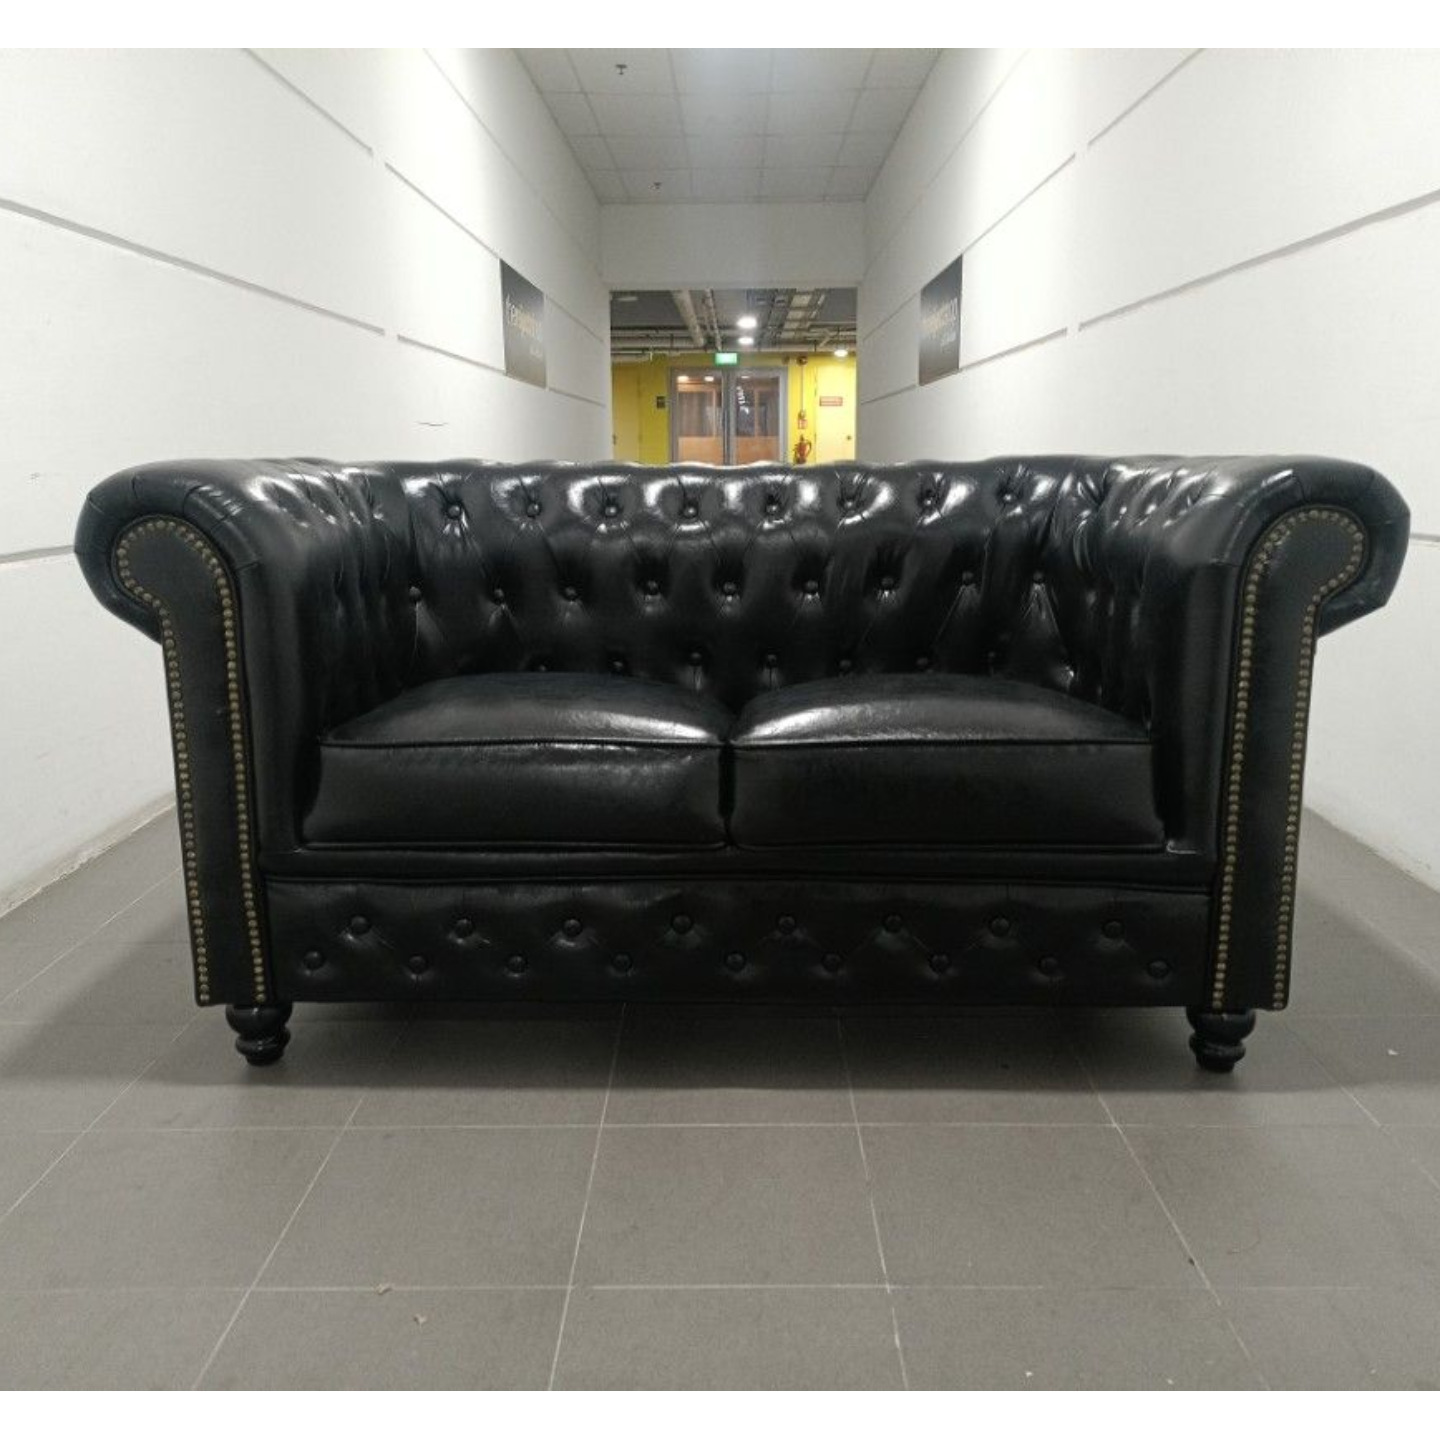 PRE ORDER SALVADORE X 2 Seater Chesterfield Sofa in GLOSS BLACK PU - Estimated Delivery by Mid May